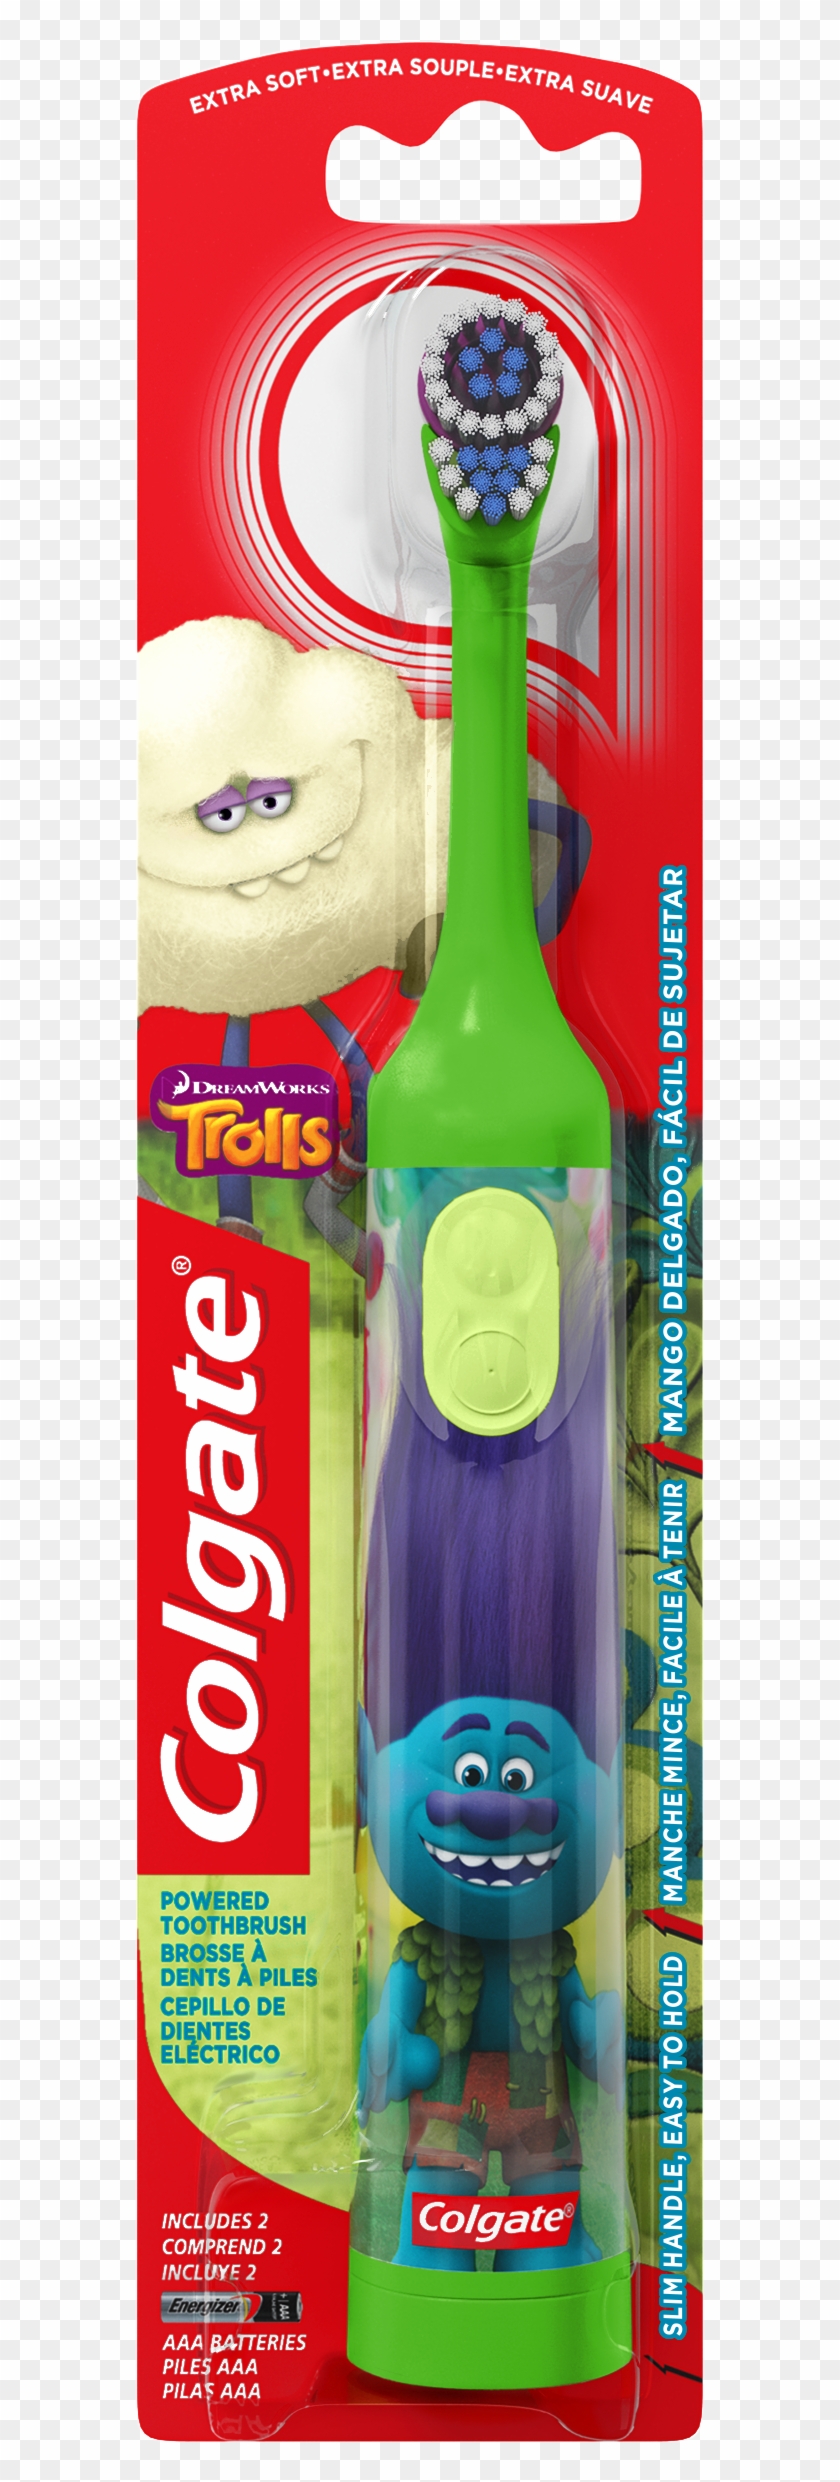 Colgate Kids Battery Powered Toothbrush - Colgate Toothbrush For Kids Clipart